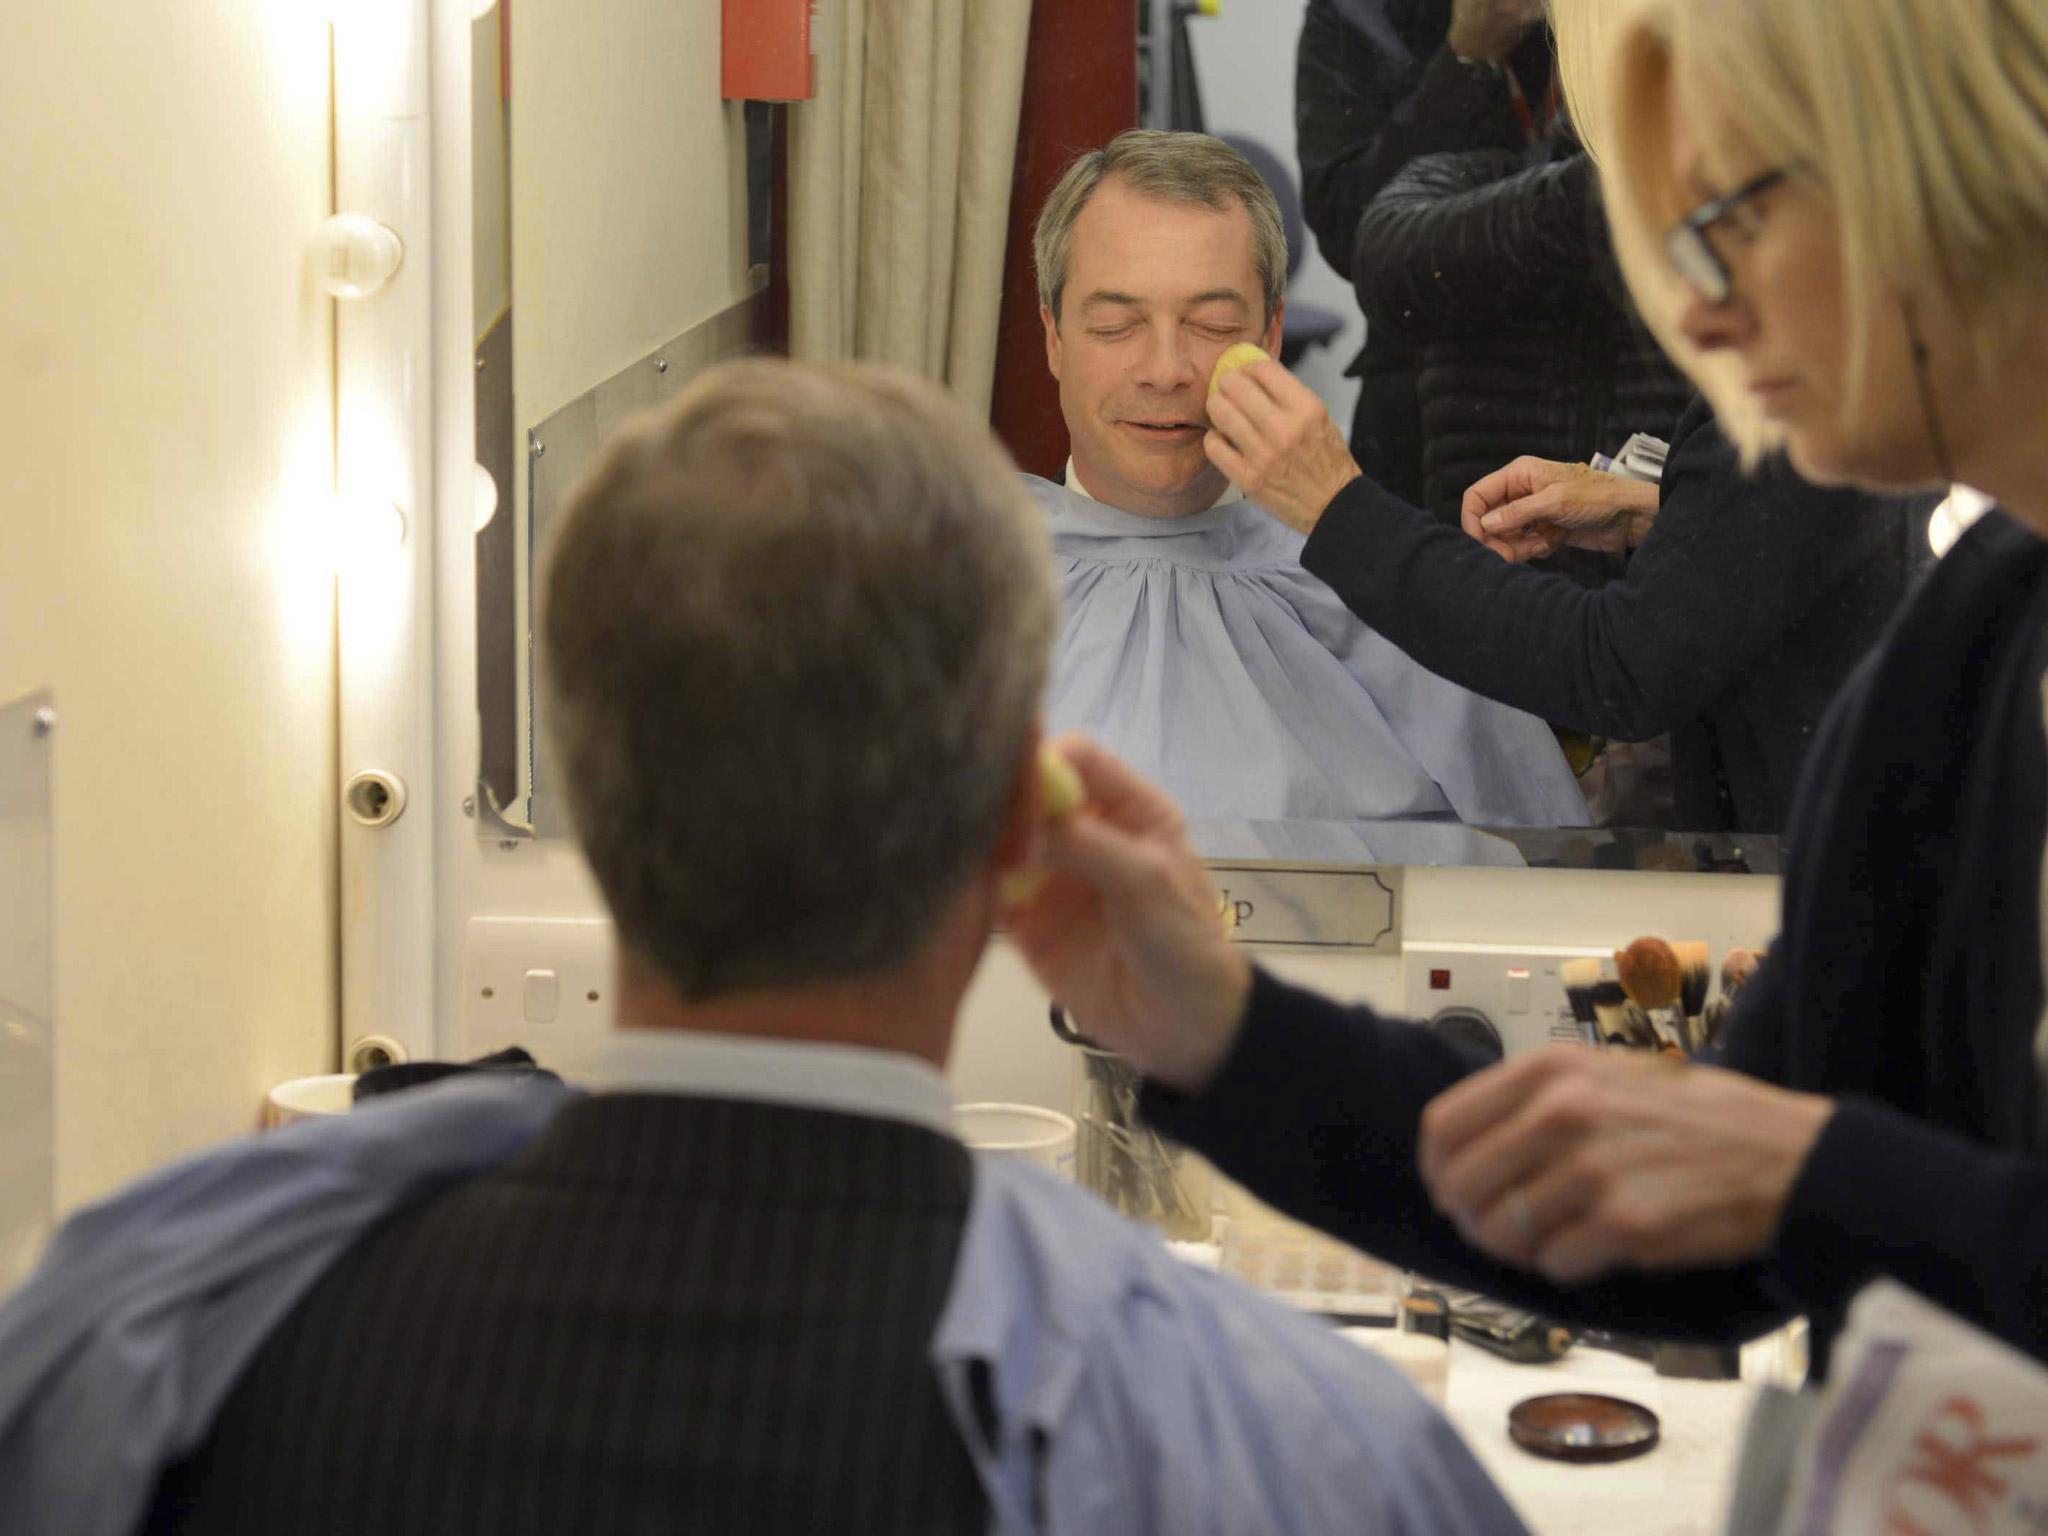 UK Independence Party (UKIP) leader Nigel Farage sits wearing make-up before appearing in the "BBC Vote 2013" studio at Milbank in London